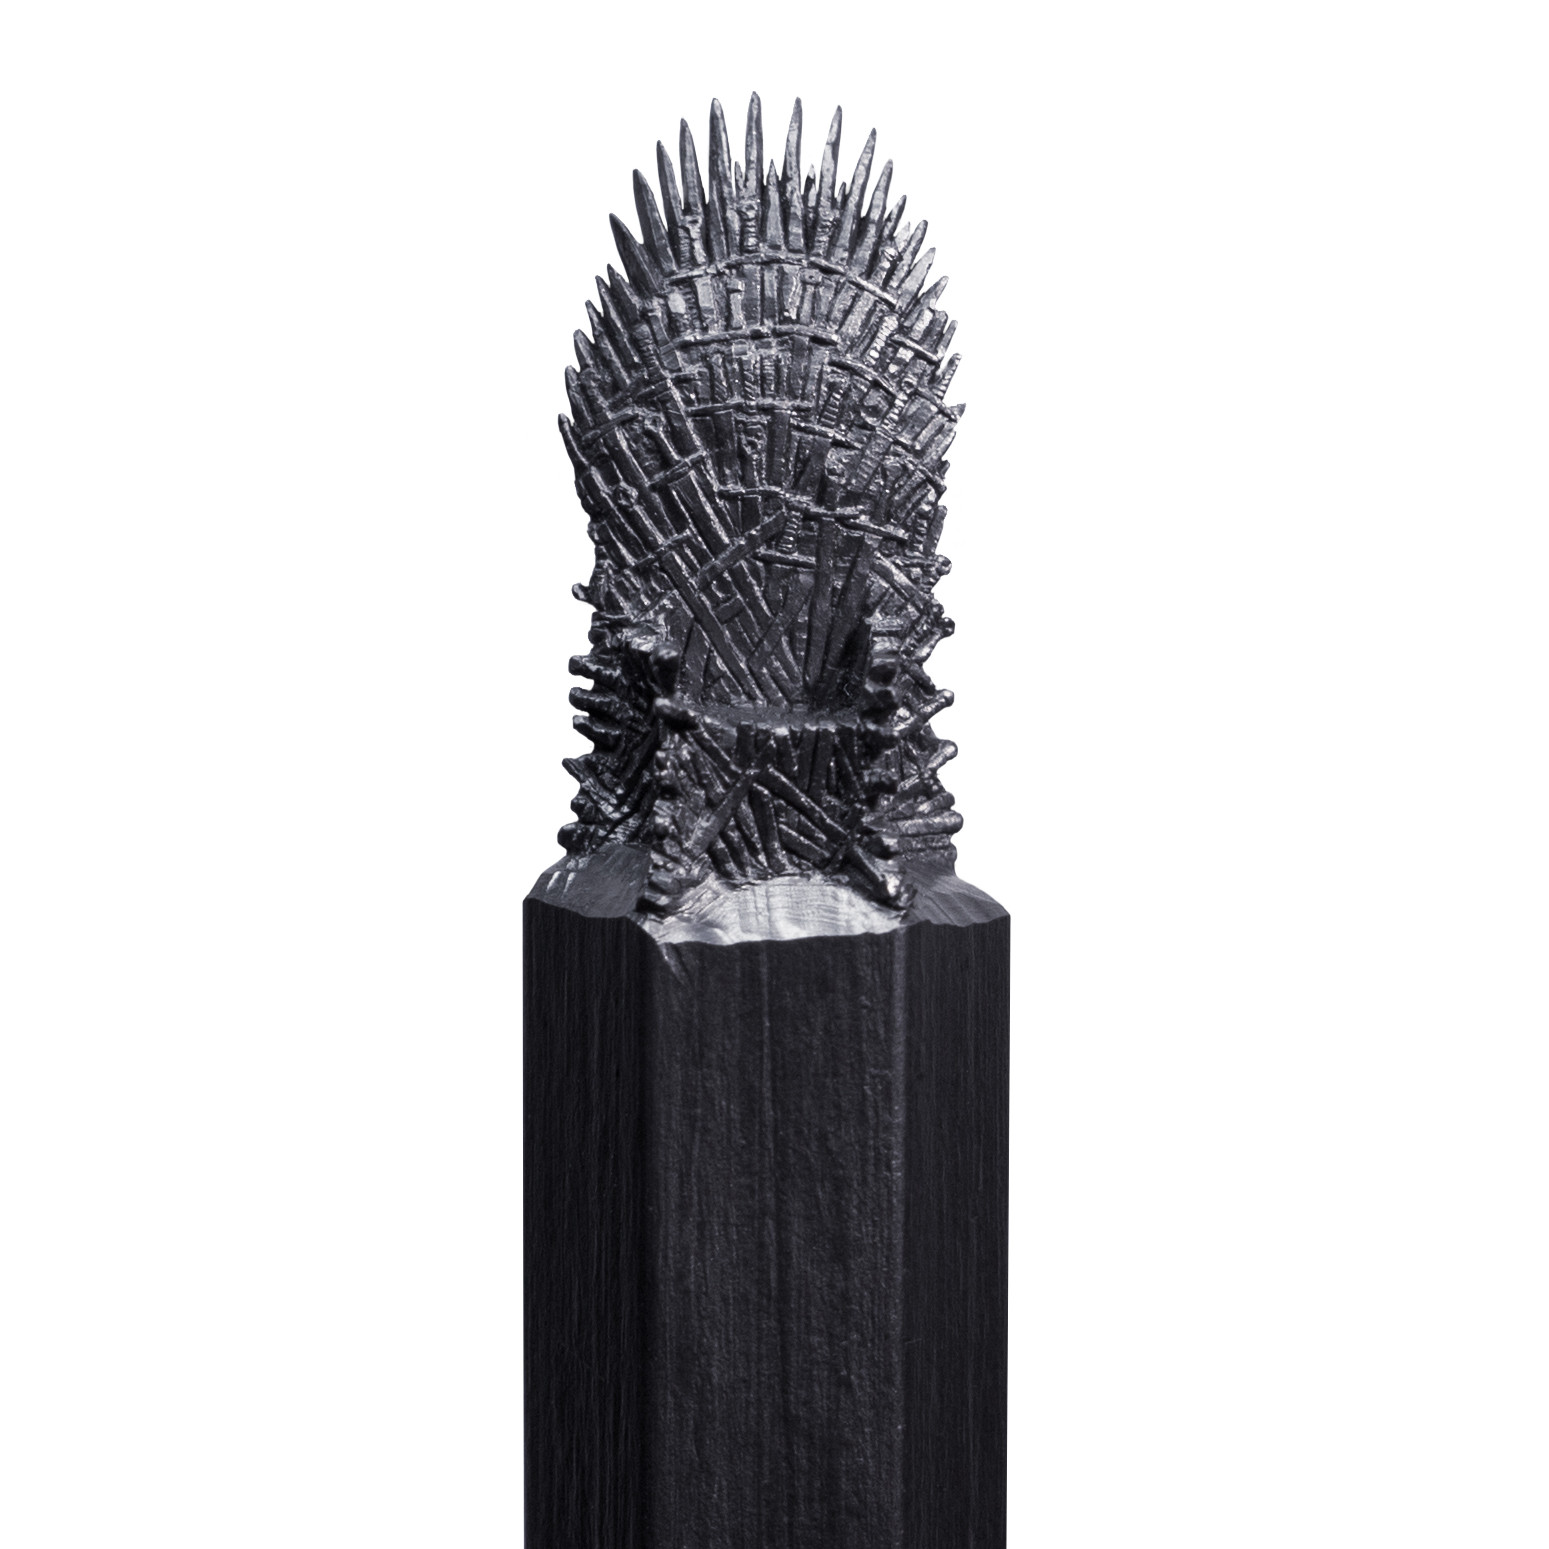 GAME OF THRONES Pencil Microscupture Exhibition - Iron Throne